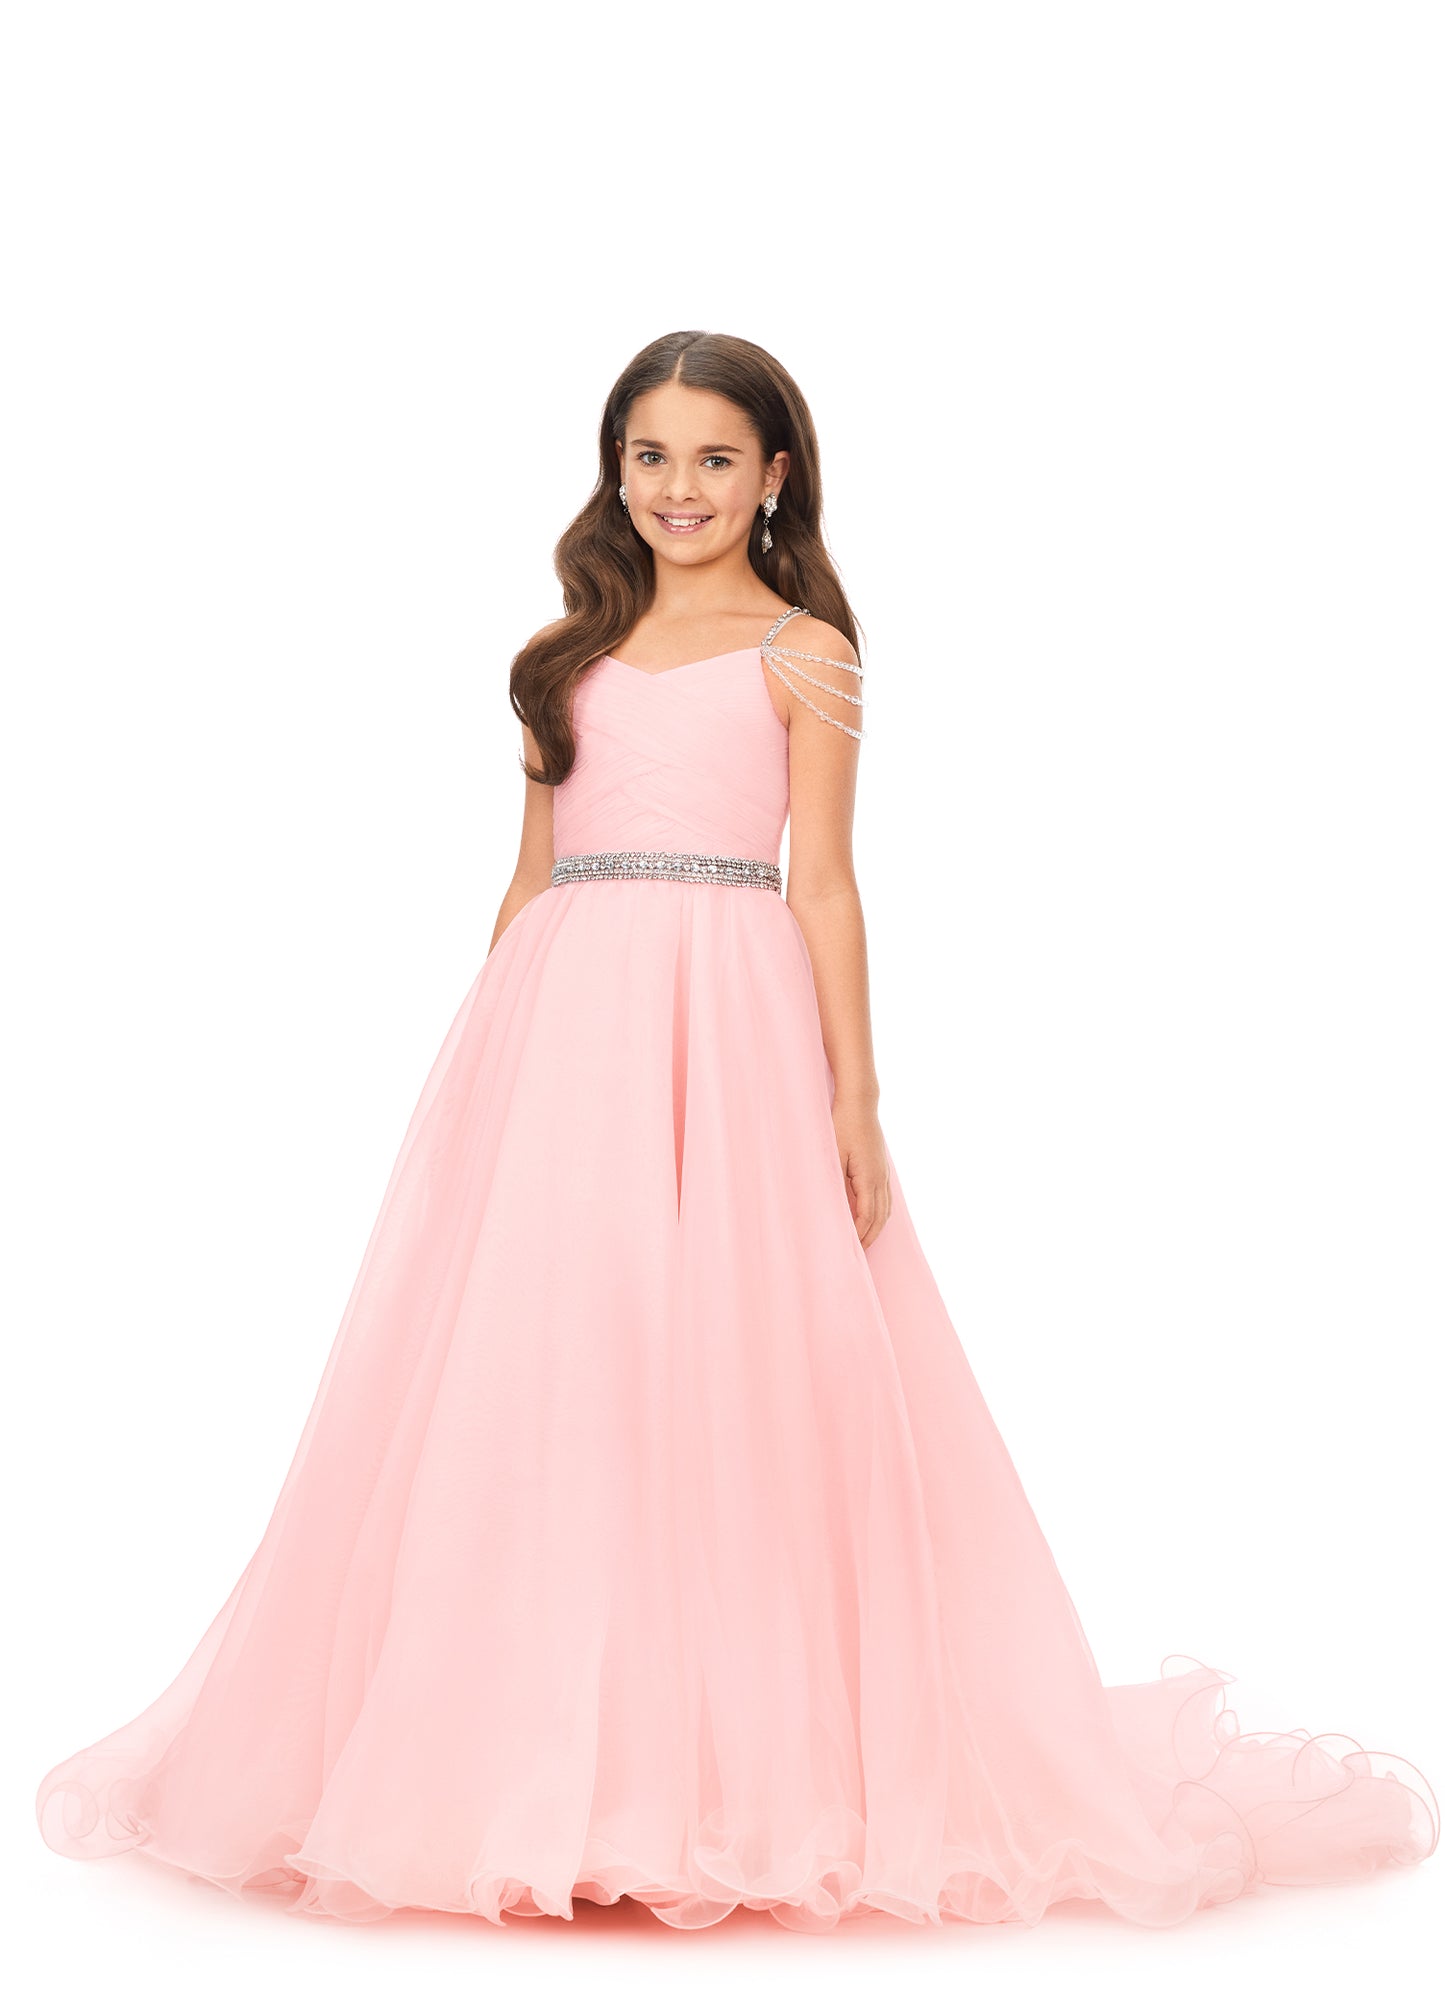 Ashley Lauren Kids 8170 Girls Organza Pageant Dress Ball Gown with Beaded Details ice-pink